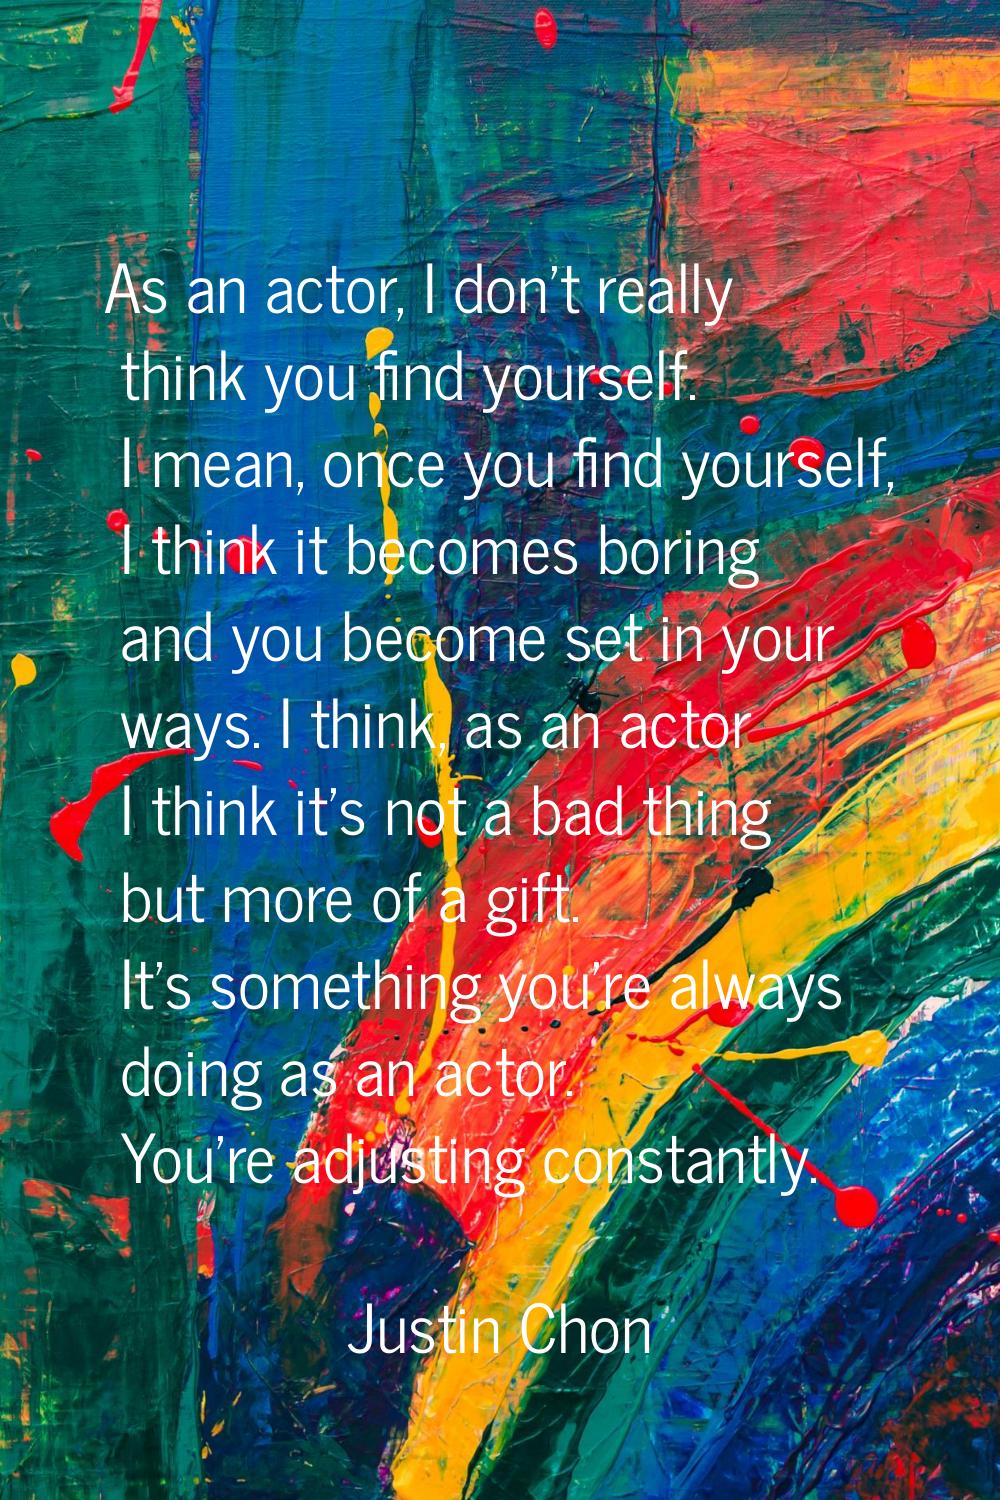 As an actor, I don't really think you find yourself. I mean, once you find yourself, I think it bec